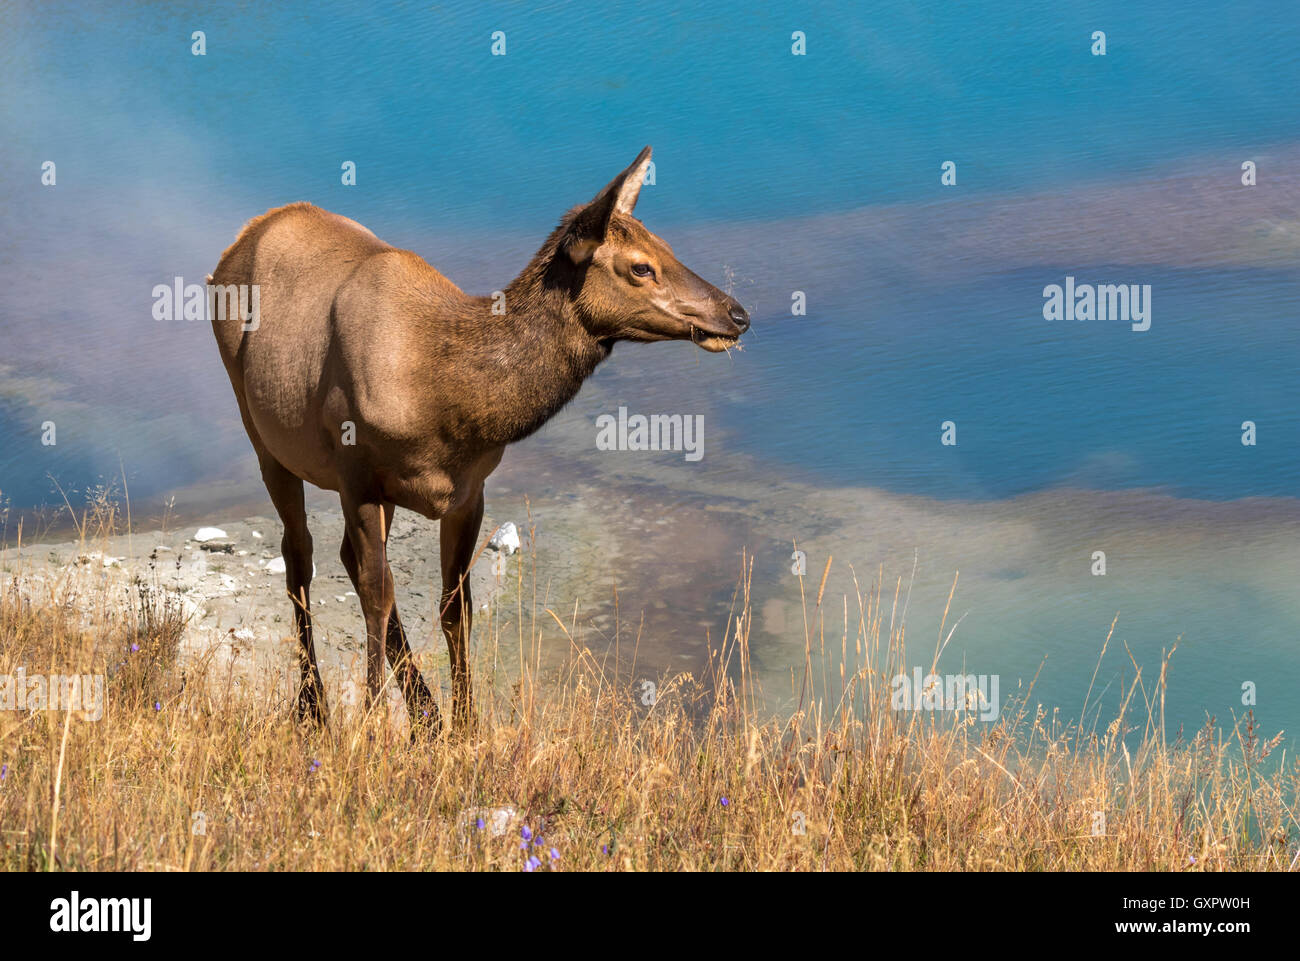 American elk (Cervus canadensis) grazing near a thermal spring, Yellowstone National Park, Wyoming, USA Stock Photo